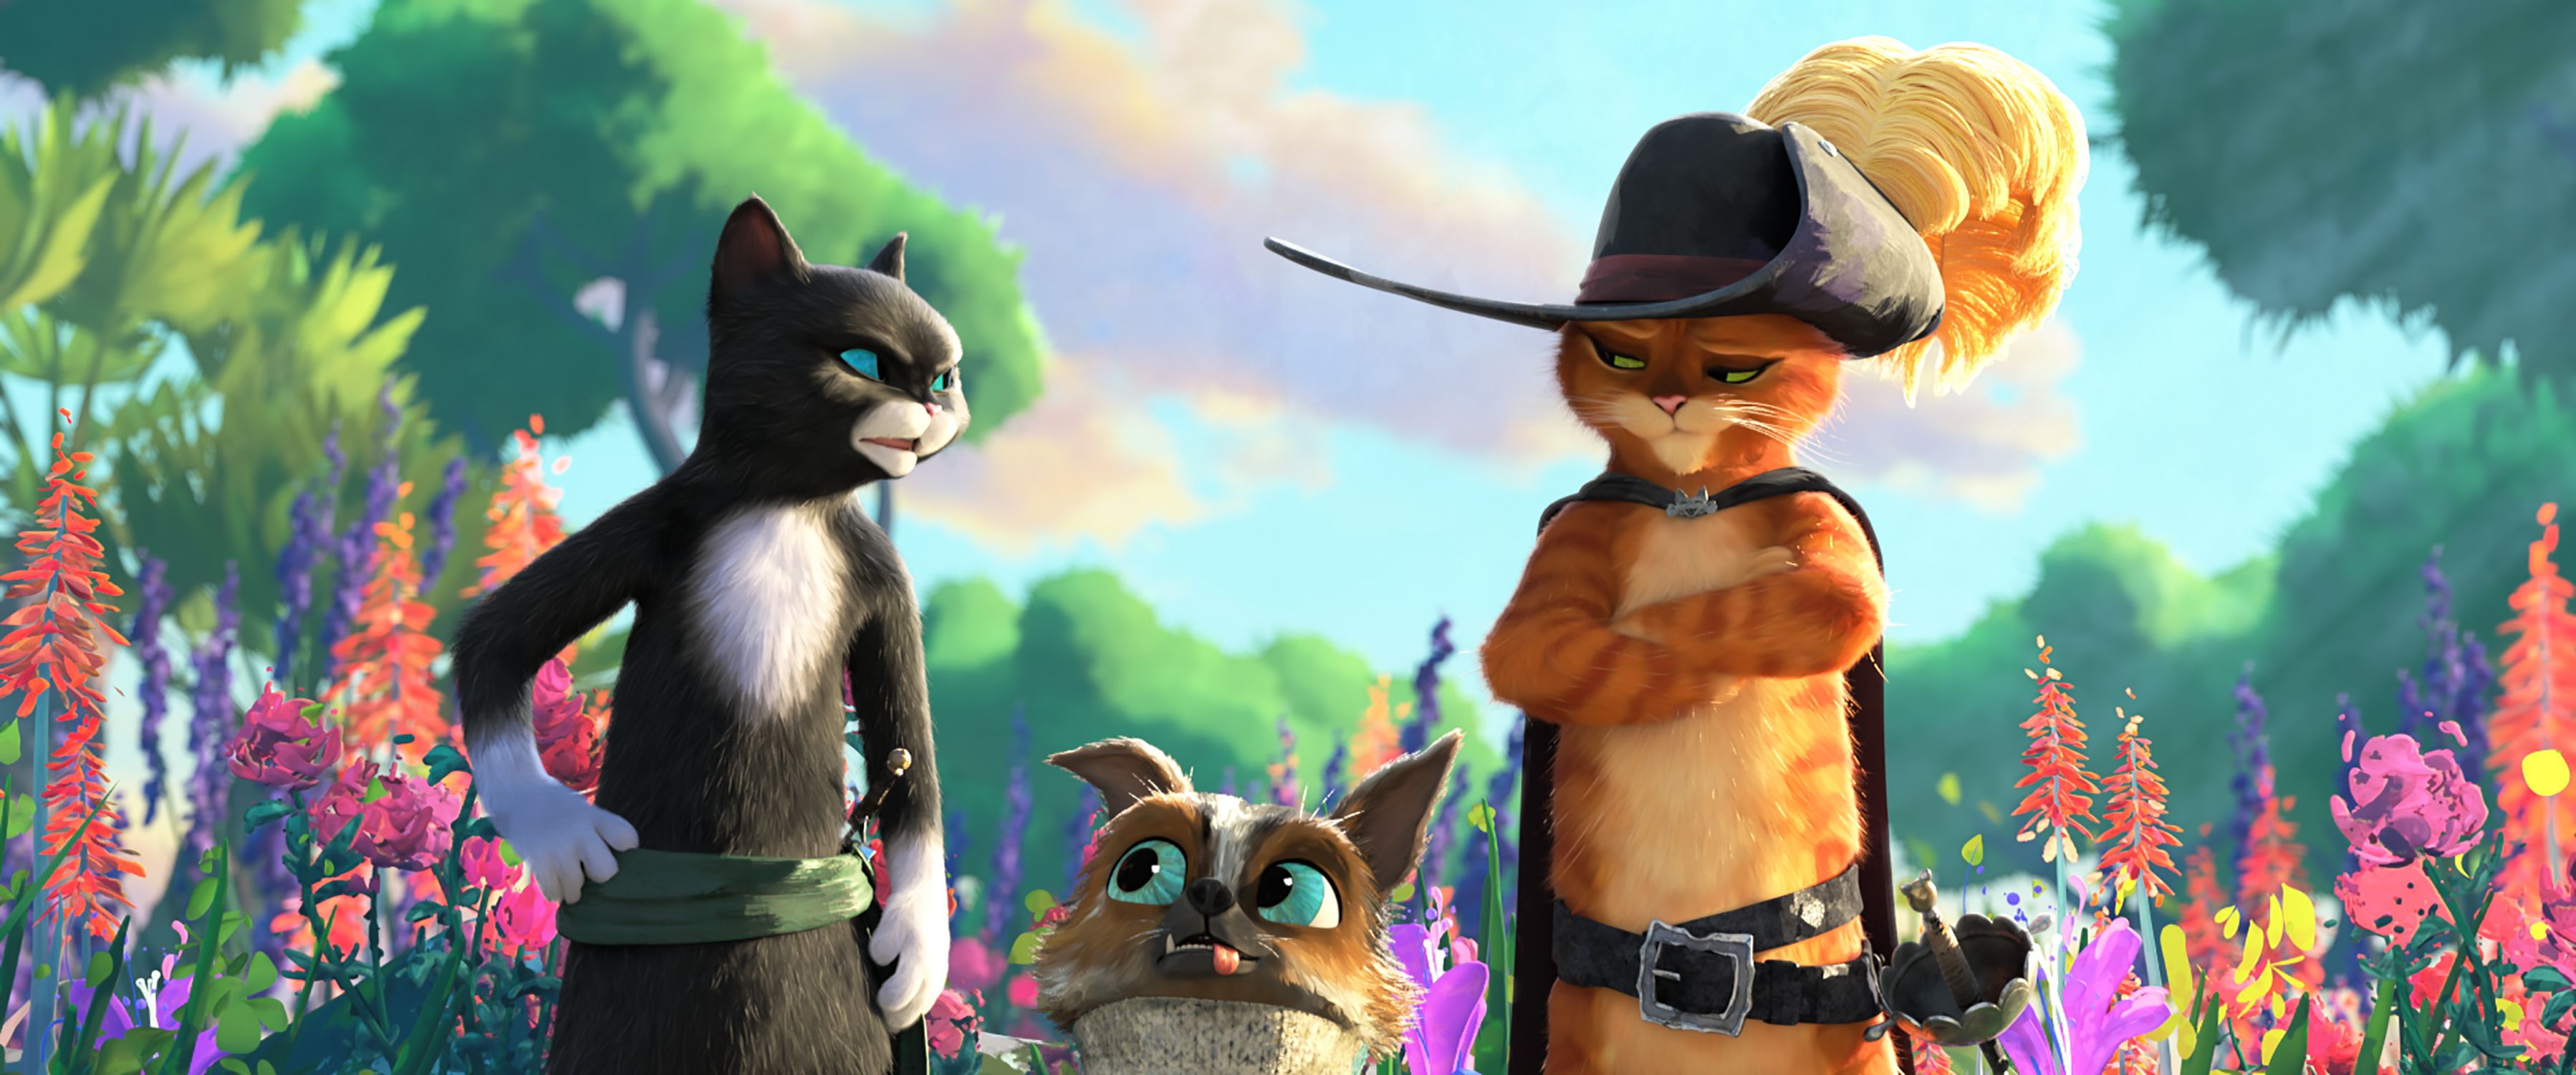 Puss in Boots 2 Image Reveals First Look At New Dog Character